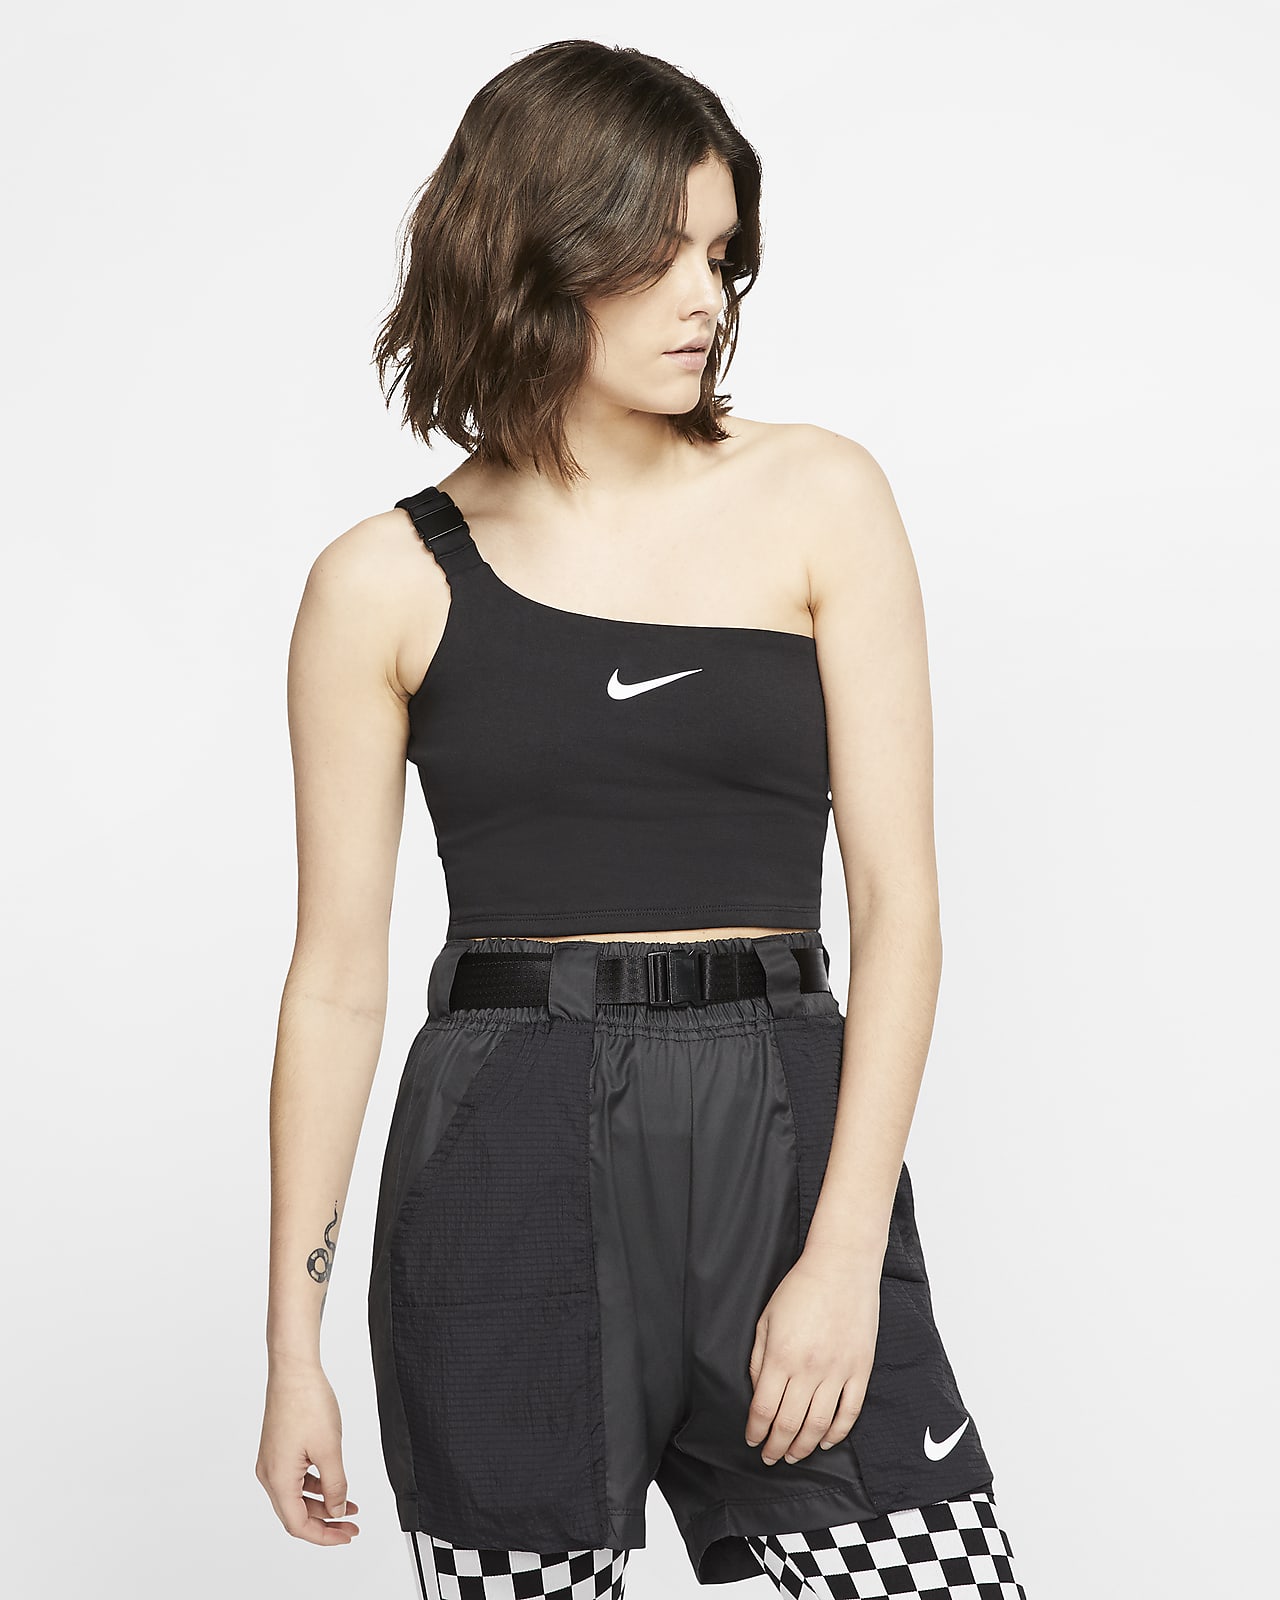 nike crop top and shorts outfit